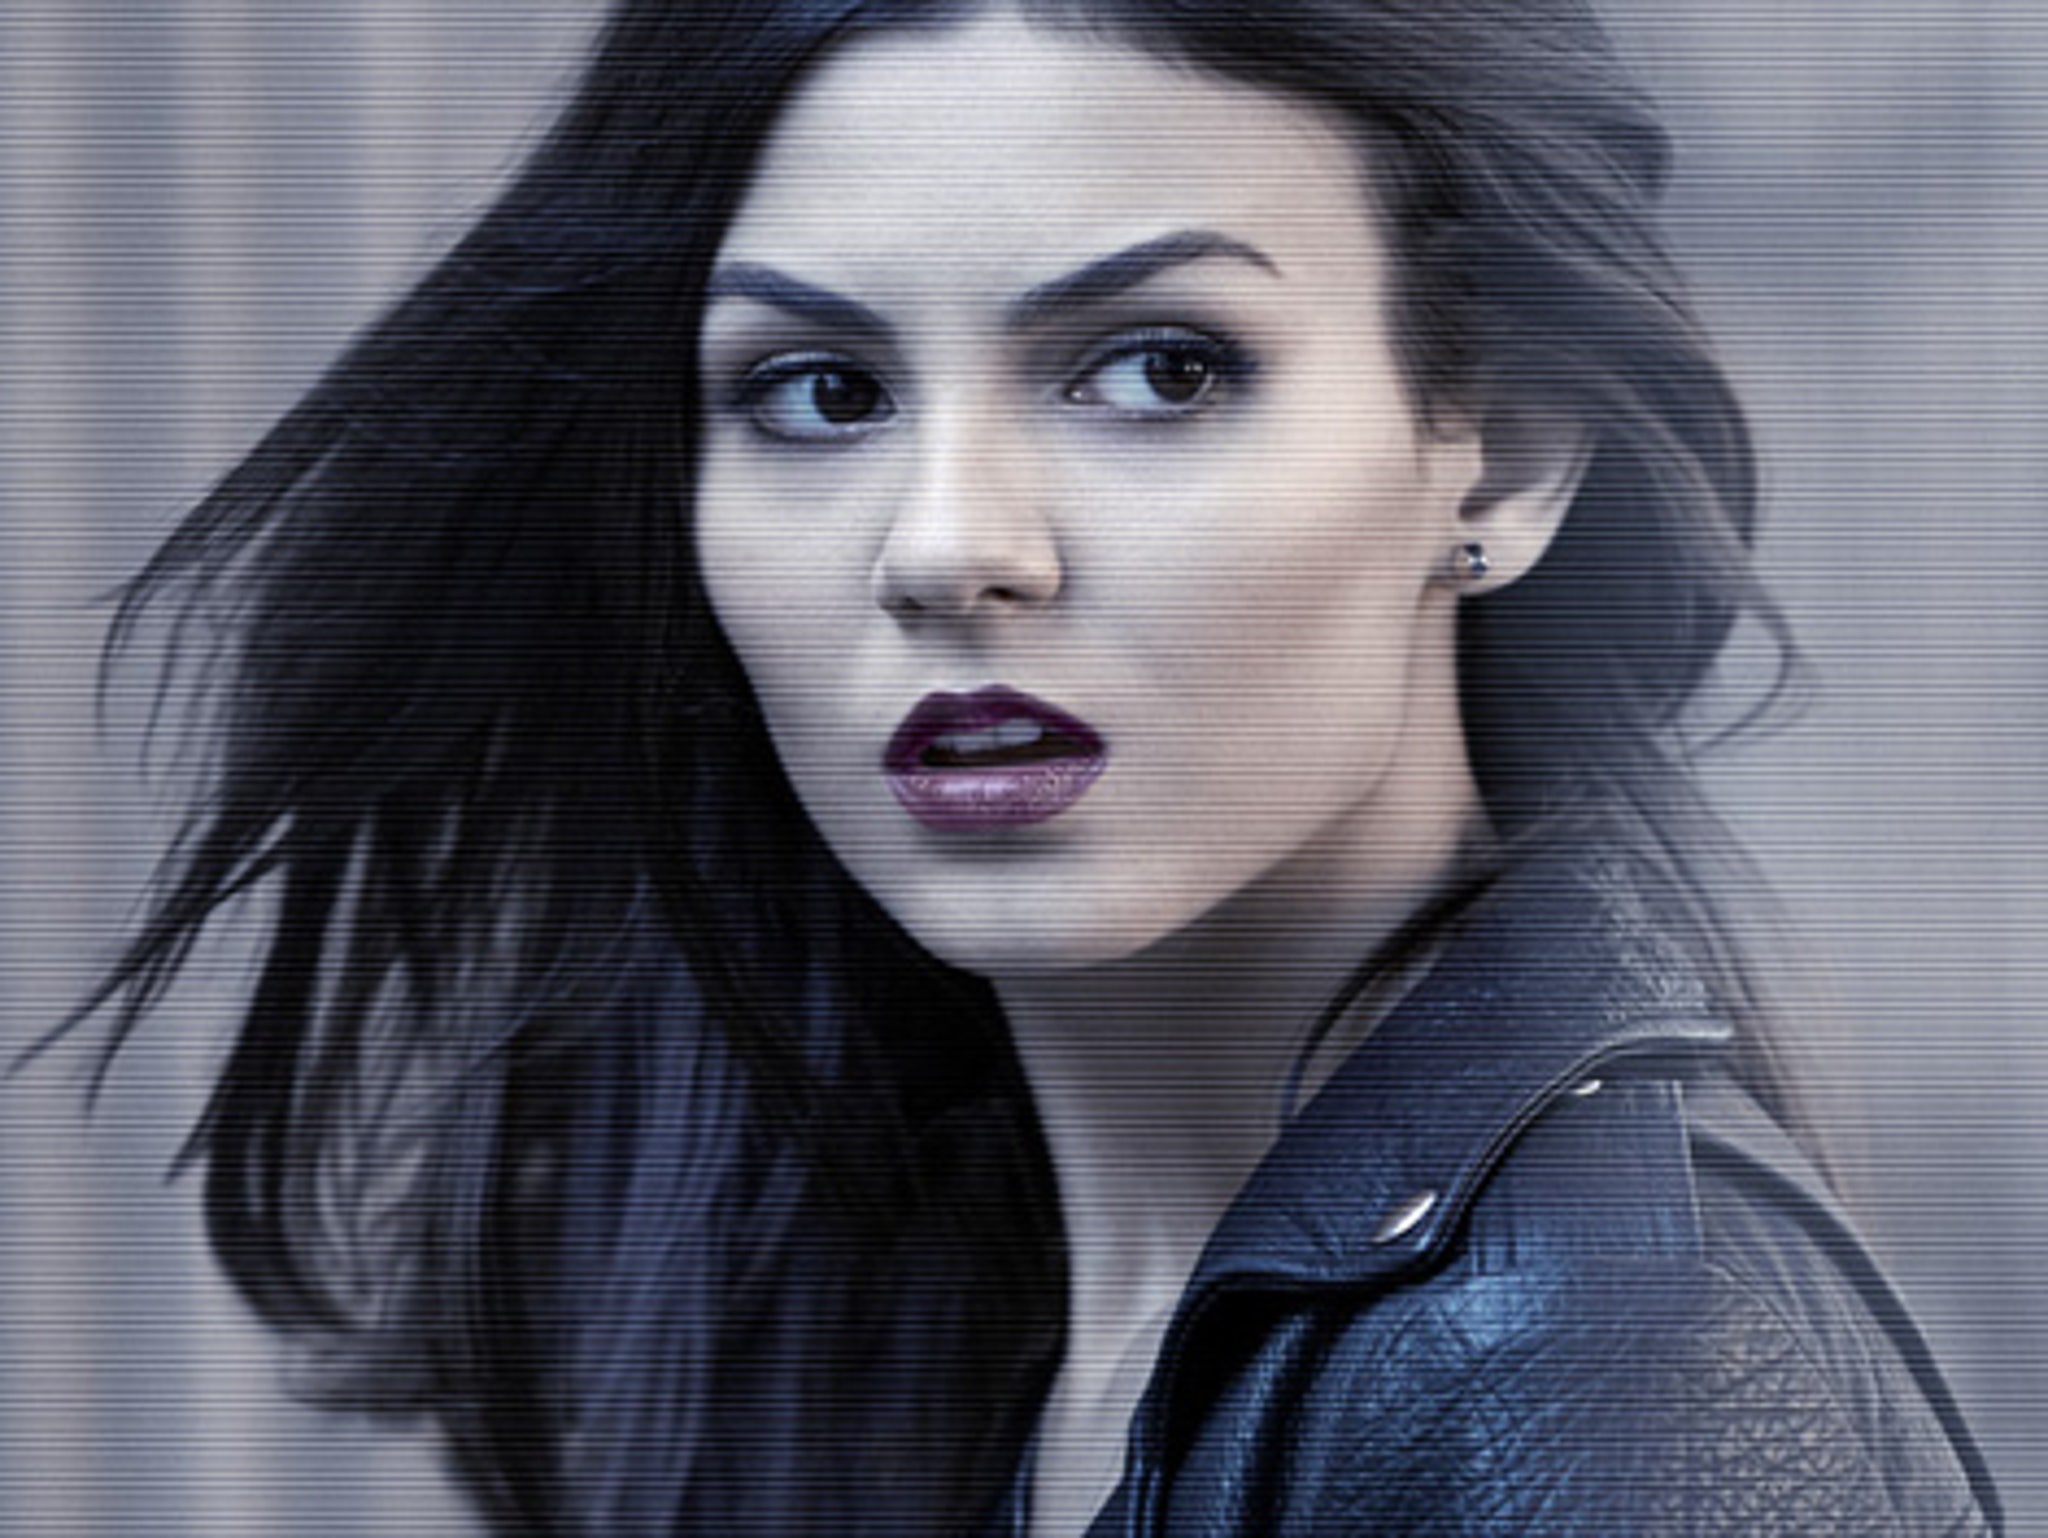 Victoria Justice Says She Is Freaked Out By MTV 'Eye Candy' Series